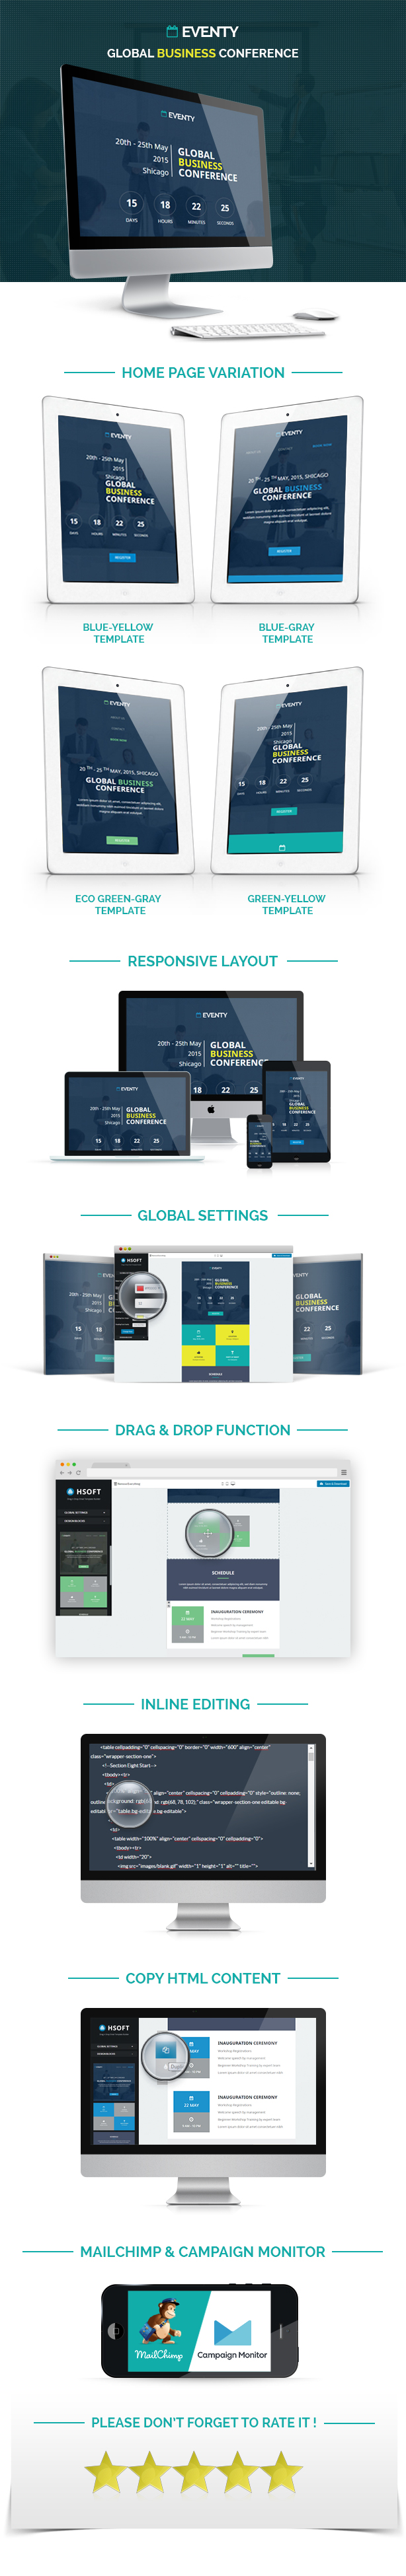 Best Global Business Conference Responsive Email Template salespage